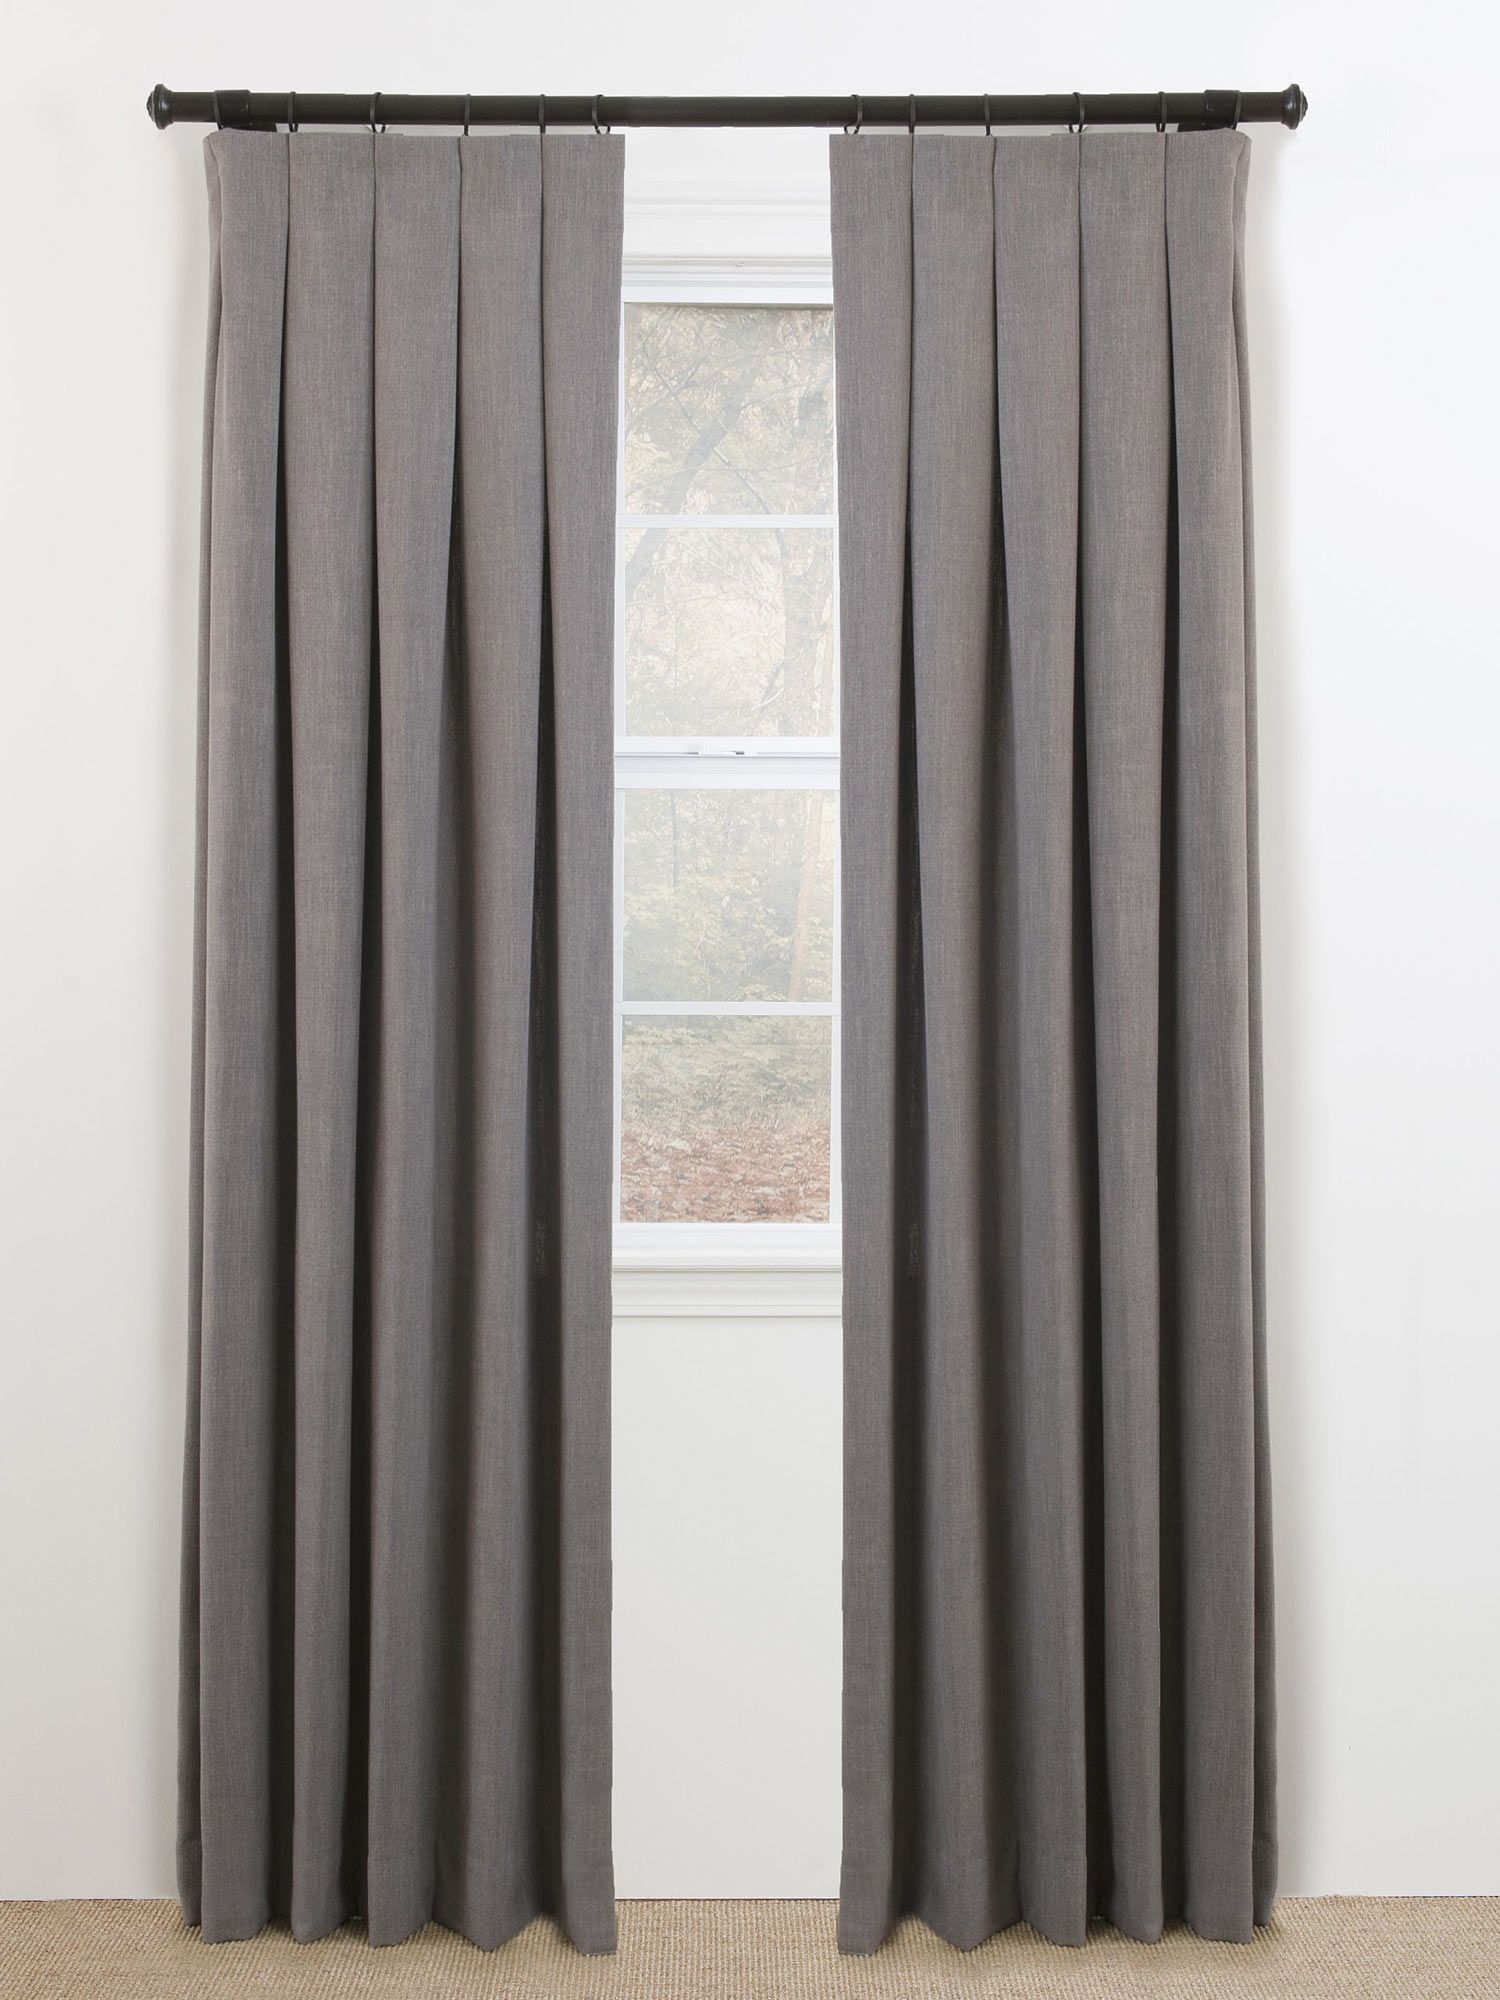 Inverted Pleat Drapery Gray in Mission Viejo